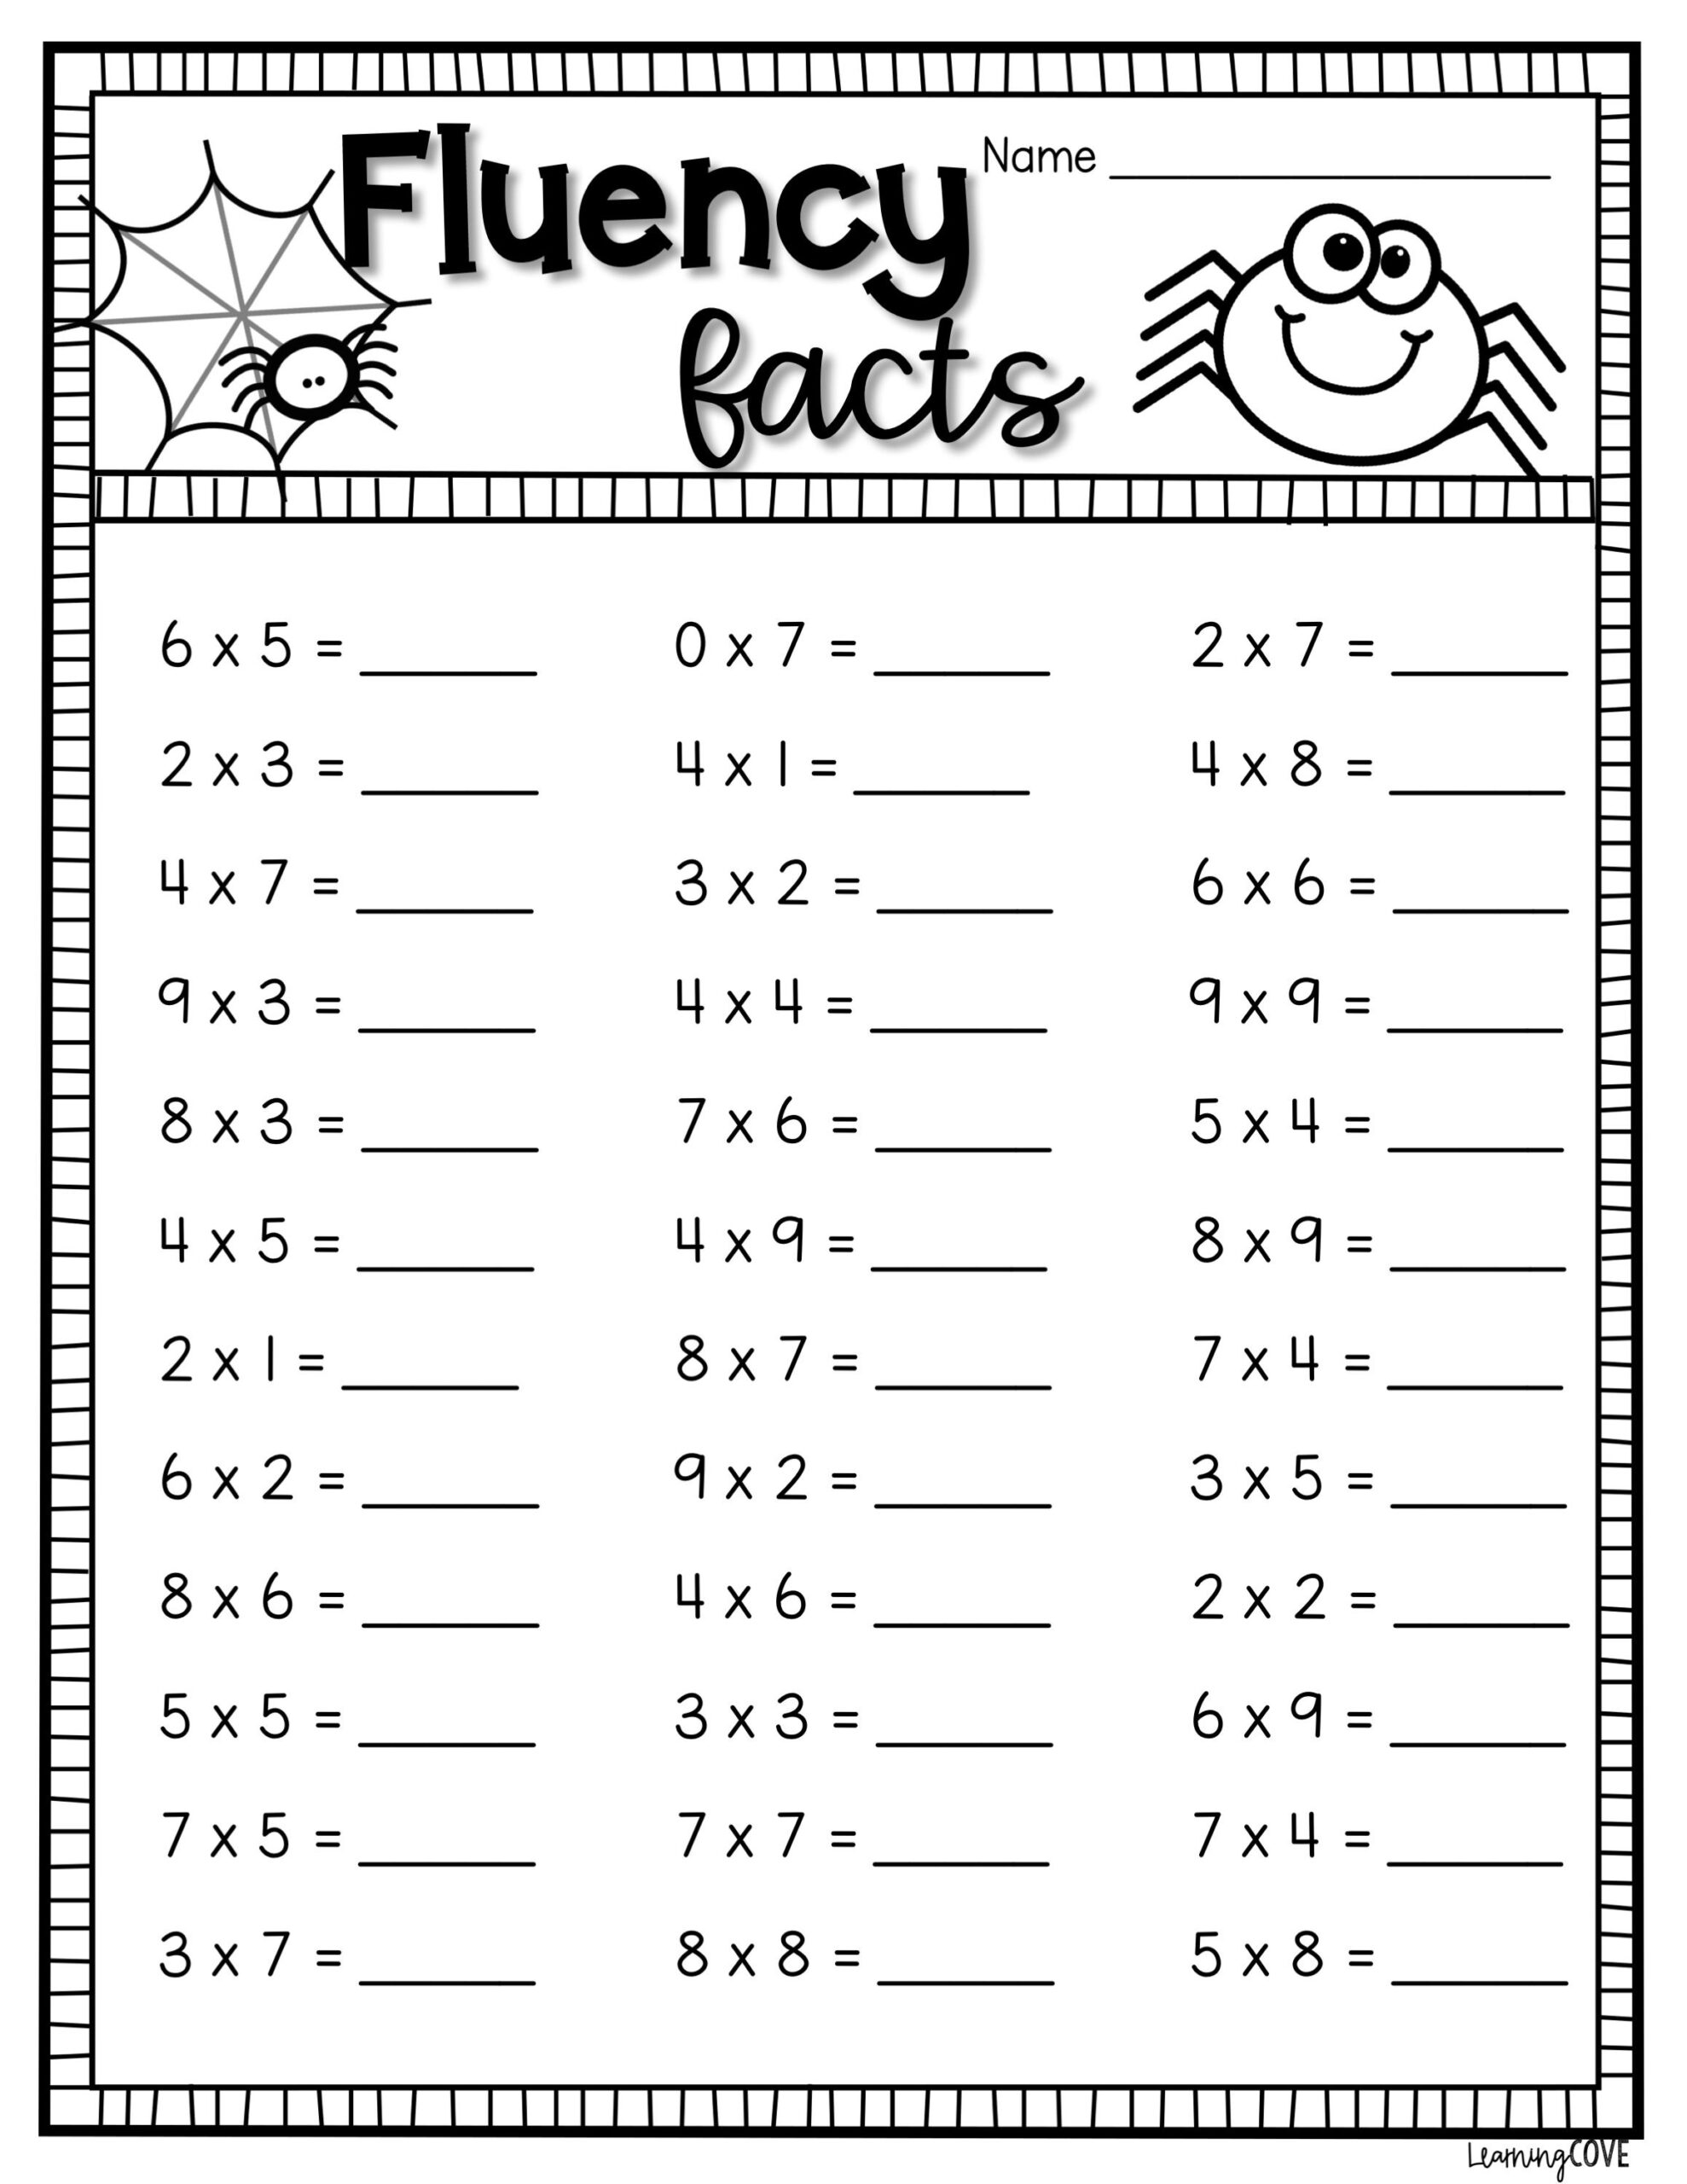 multiplication-worksheets-halloween-printable-word-searches